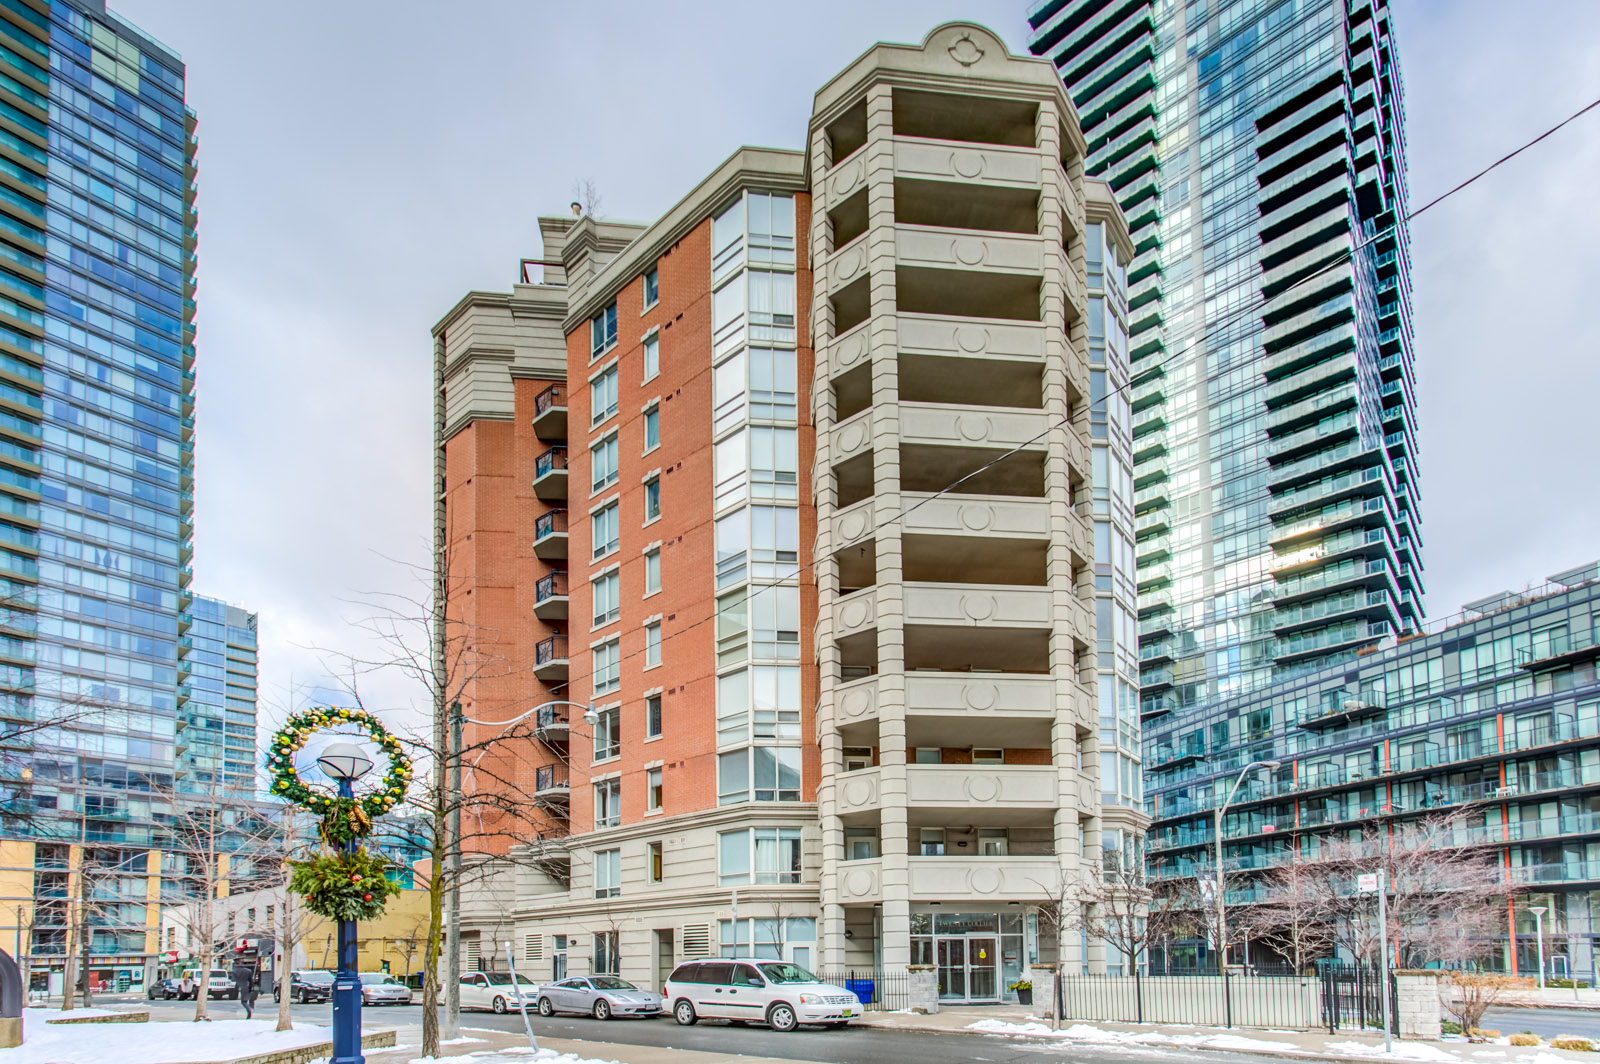 View of 20 Collier St, a 13-storey boutique condo of redbrick and gray stone.